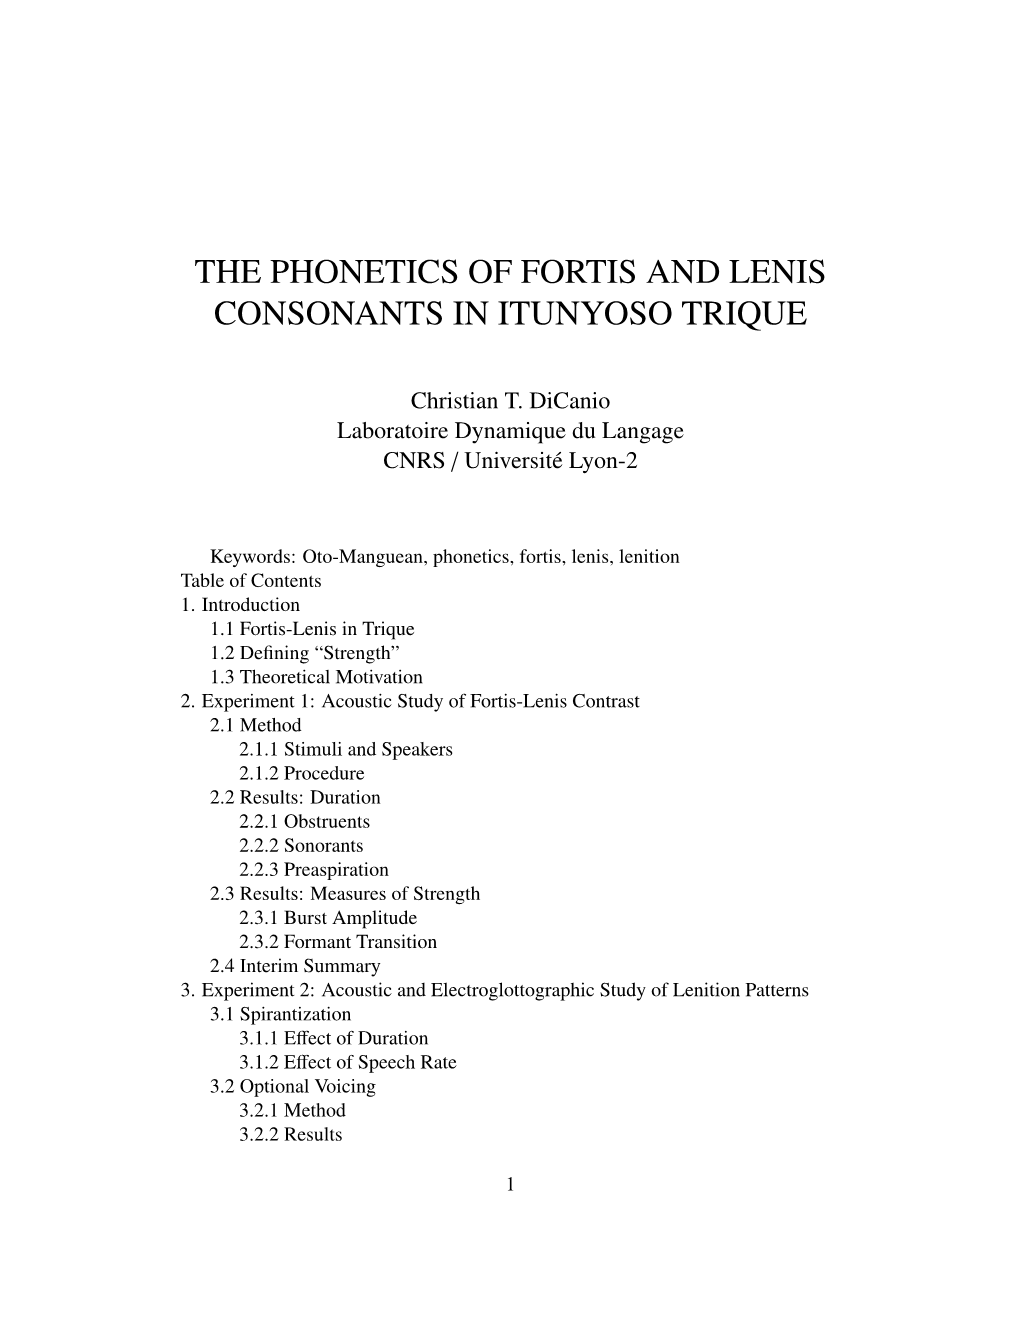 The Phonetics of Fortis and Lenis Consonants in Itunyoso Trique